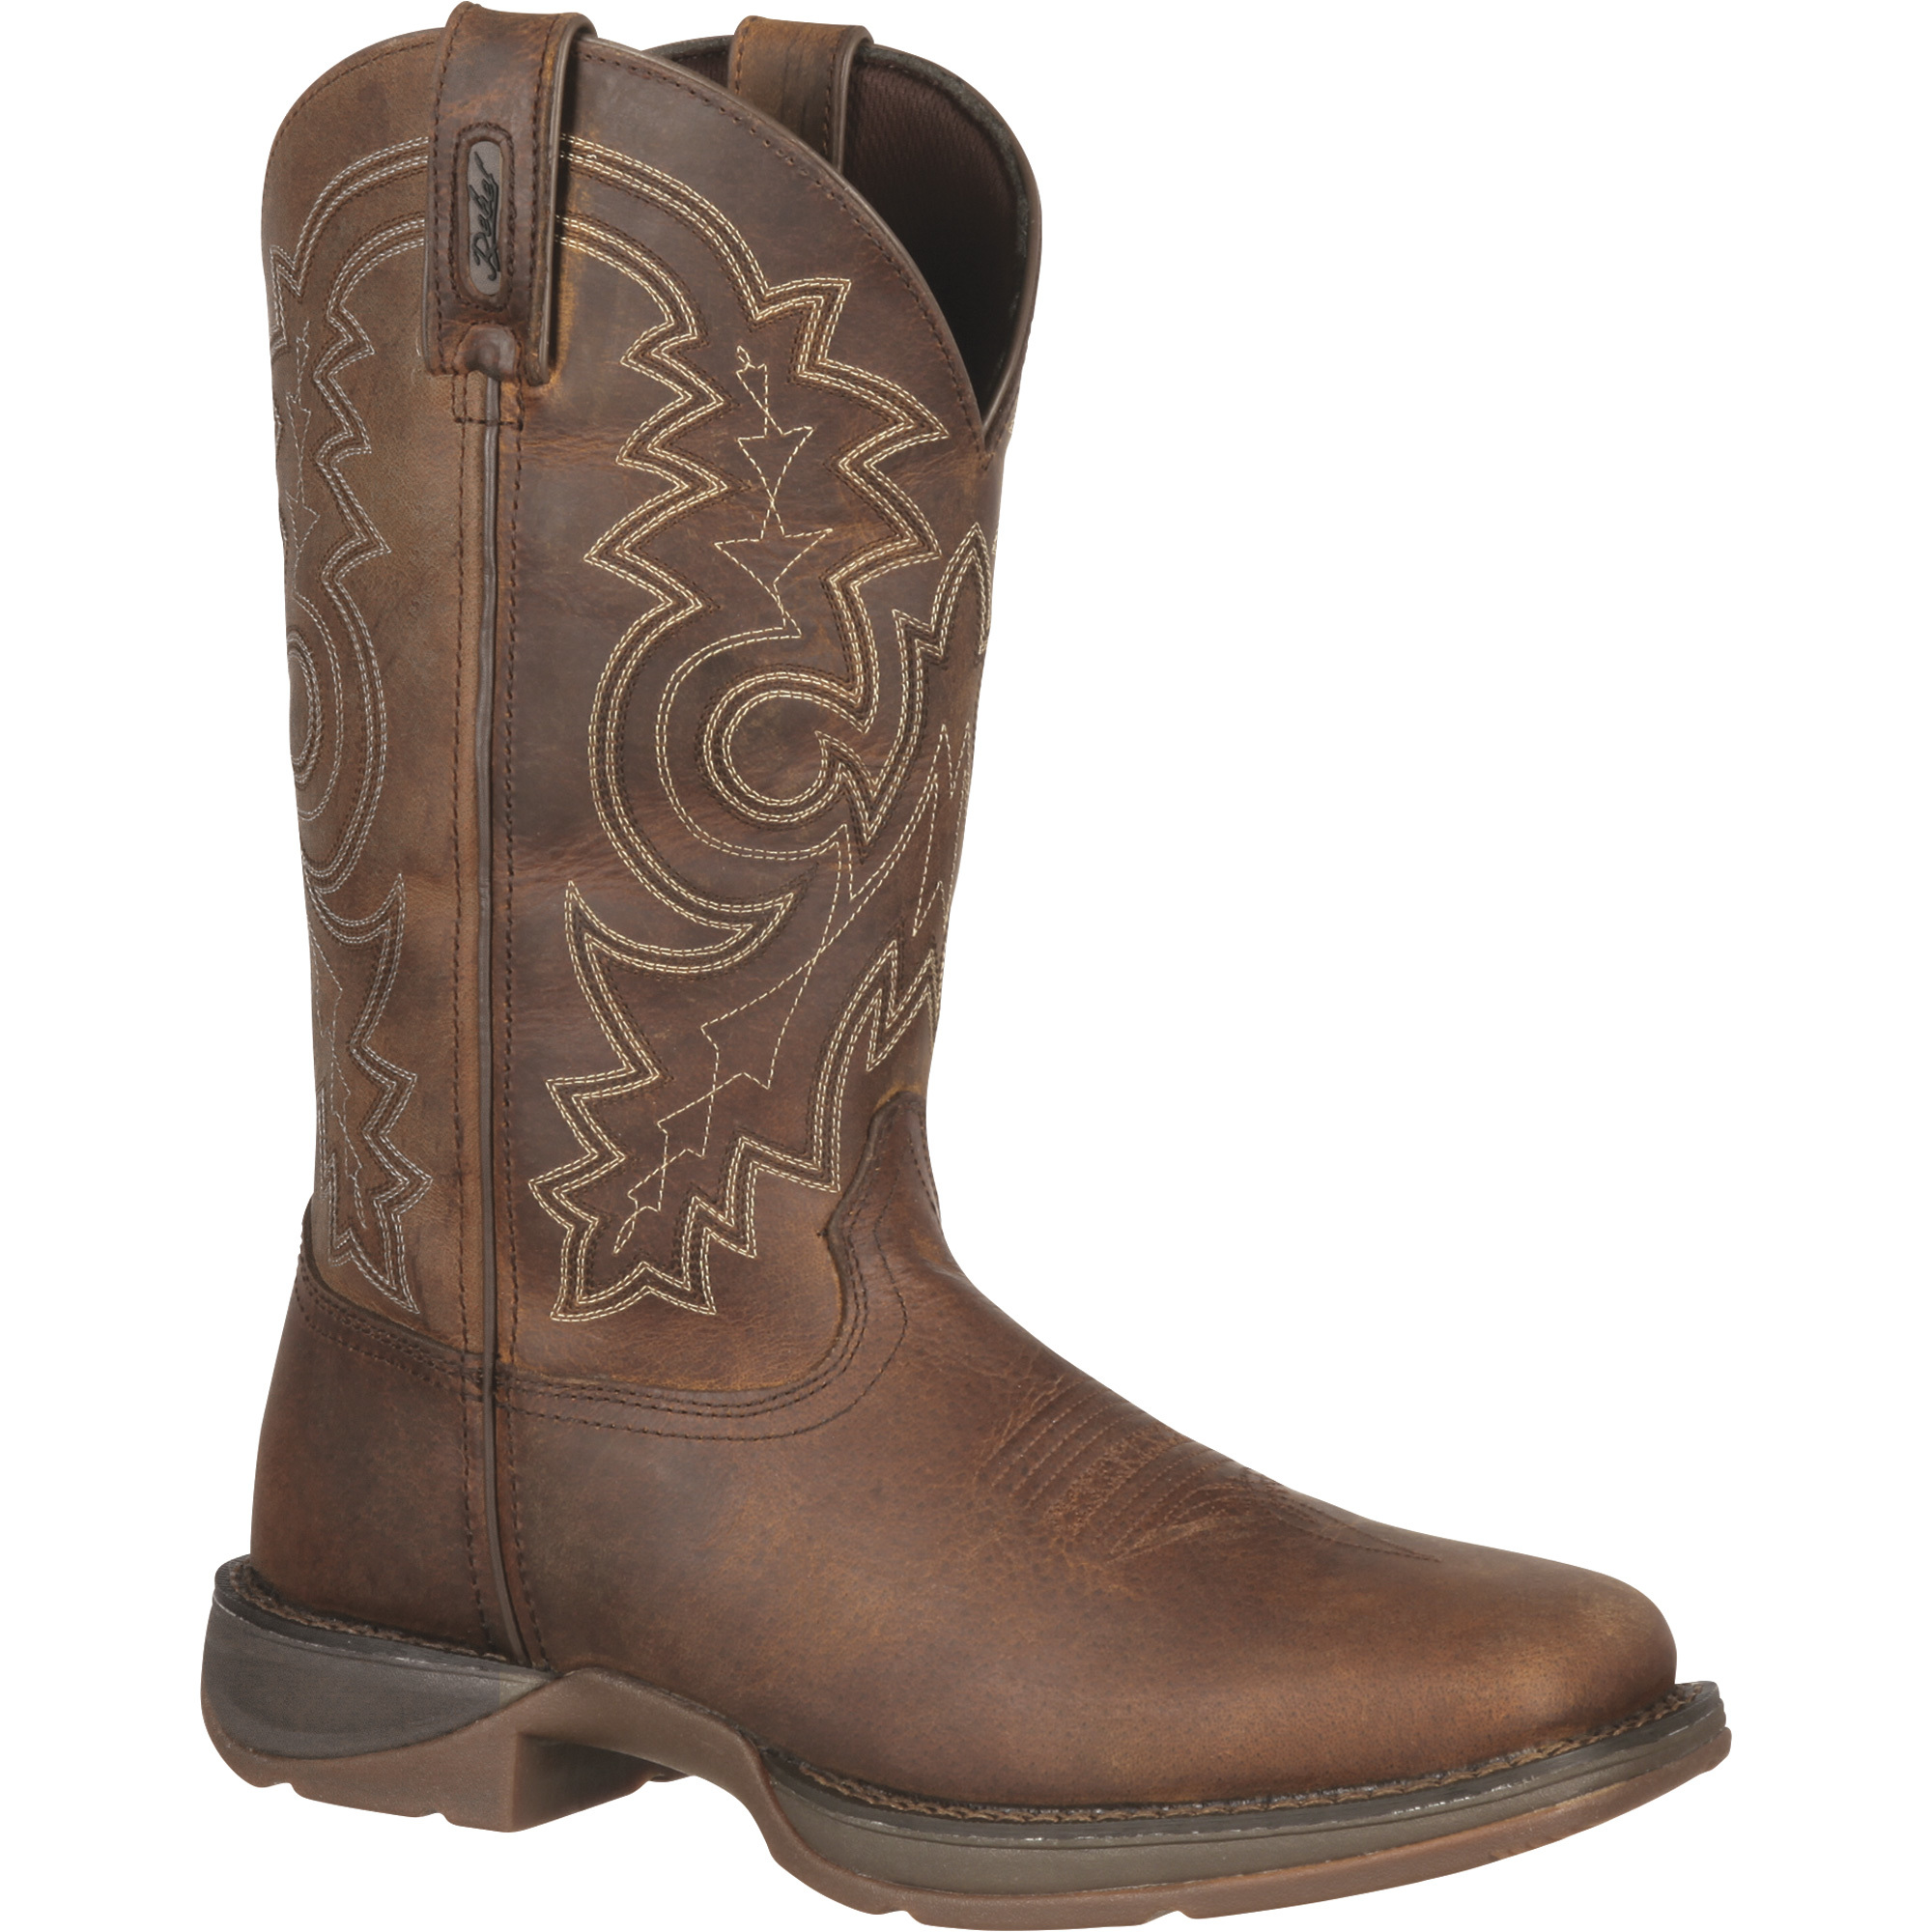 Durango Rebel 11Inch Square-Toe Western Boots - Brown, Size 11 Wide, Model DB4443